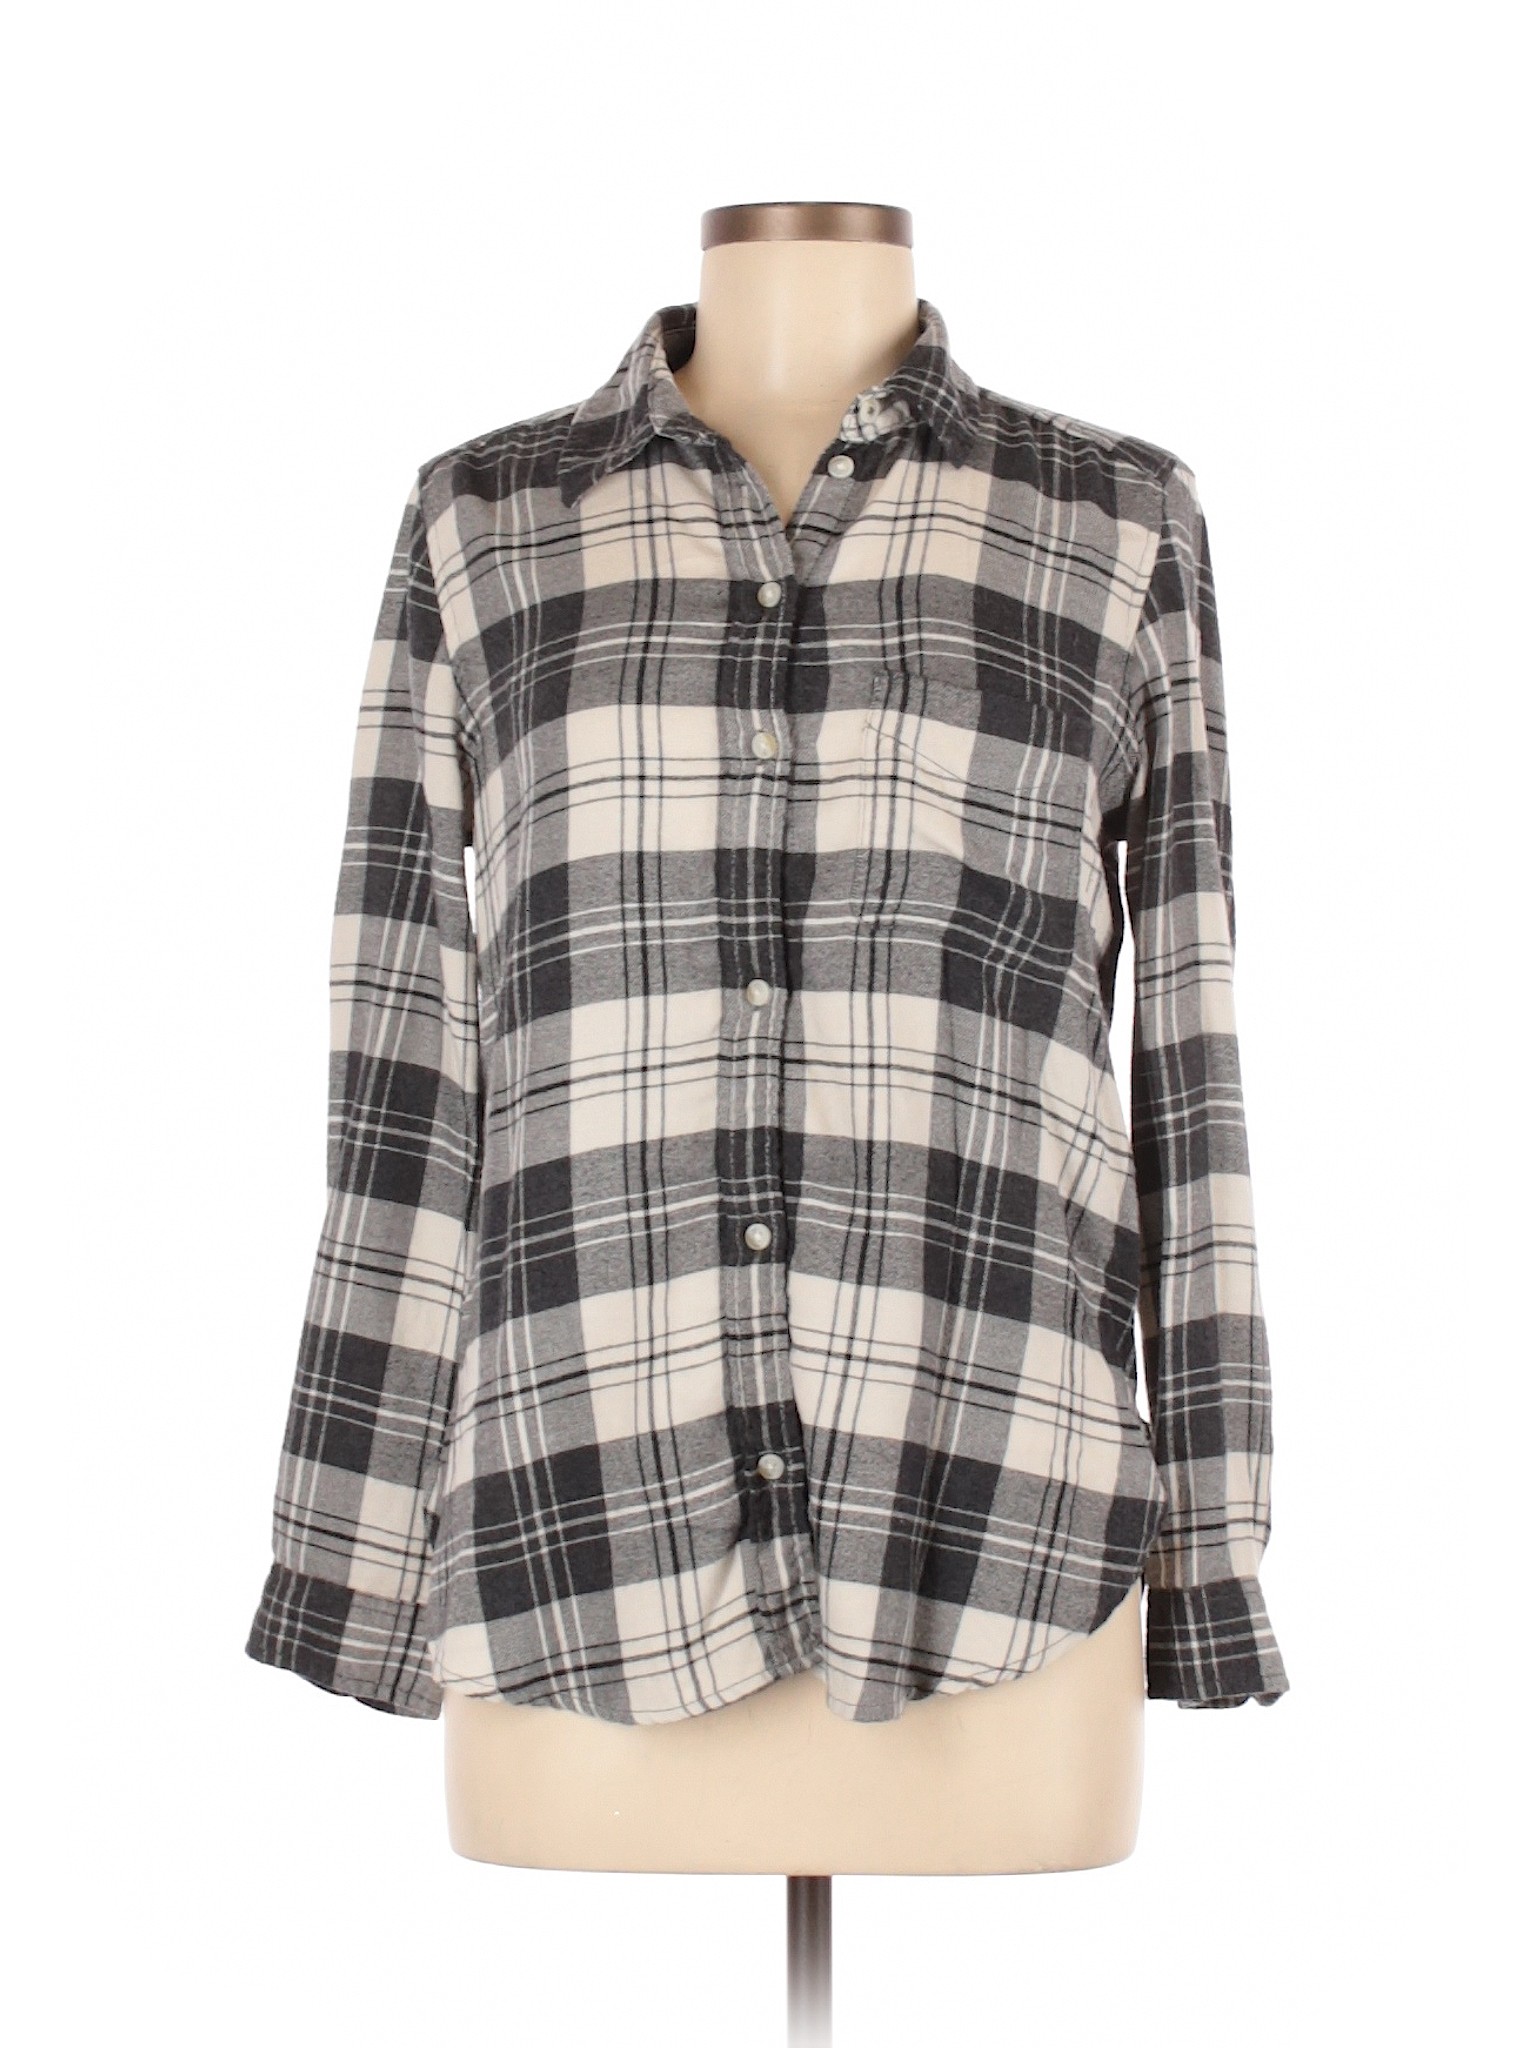 American Eagle Outfitters Women Gray Long Sleeve Button-Down Shirt S | eBay